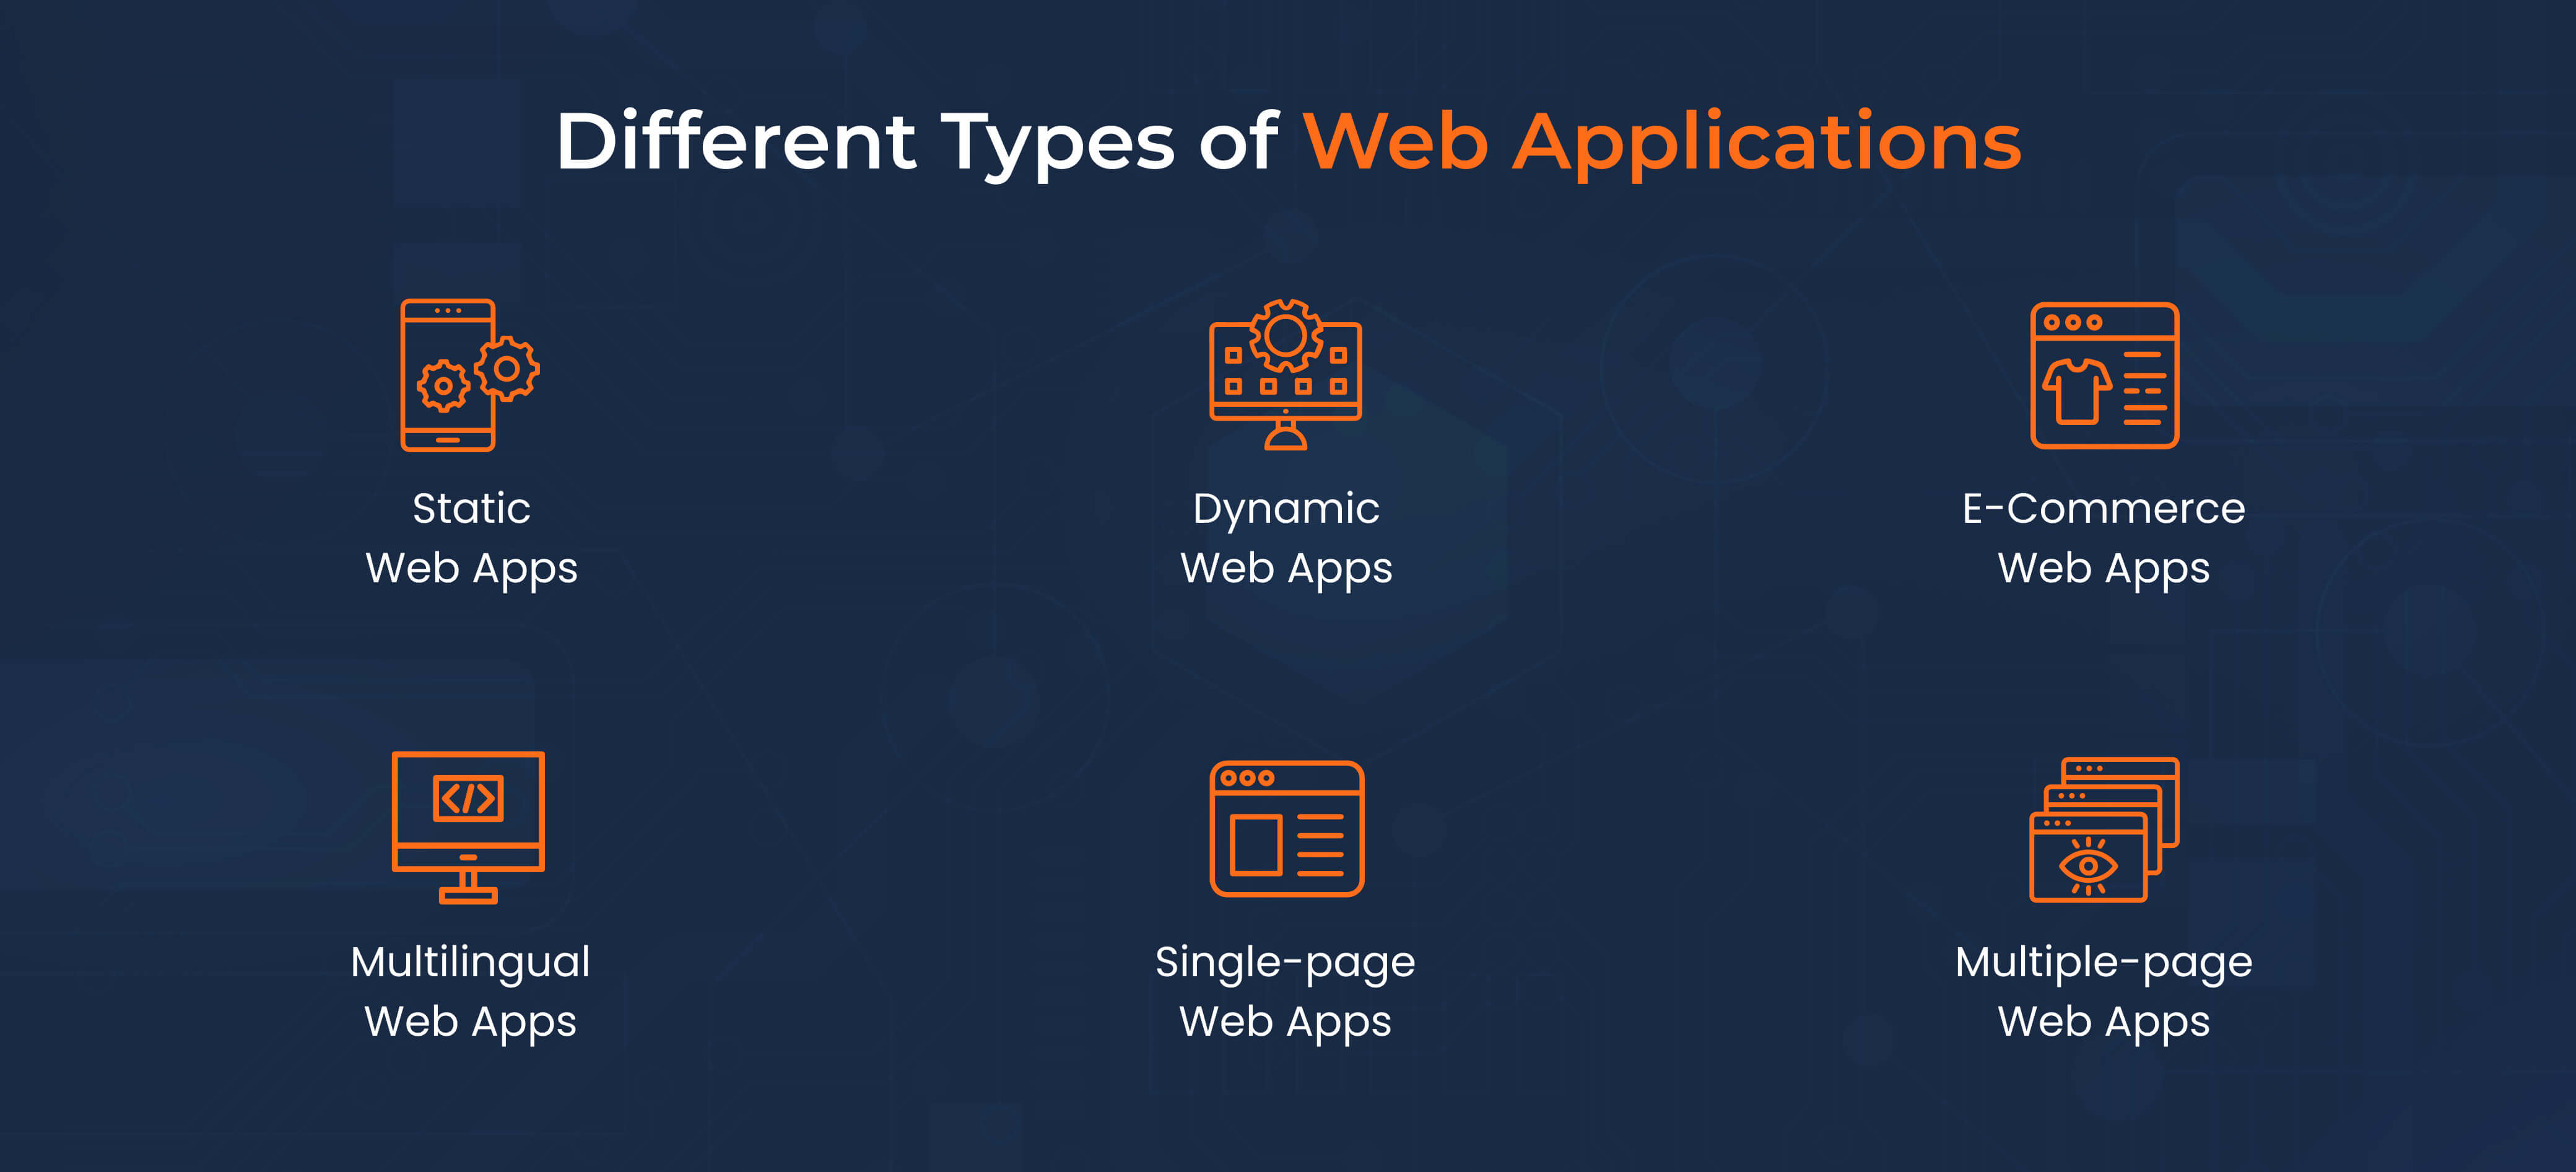 Different Types of Web Applications